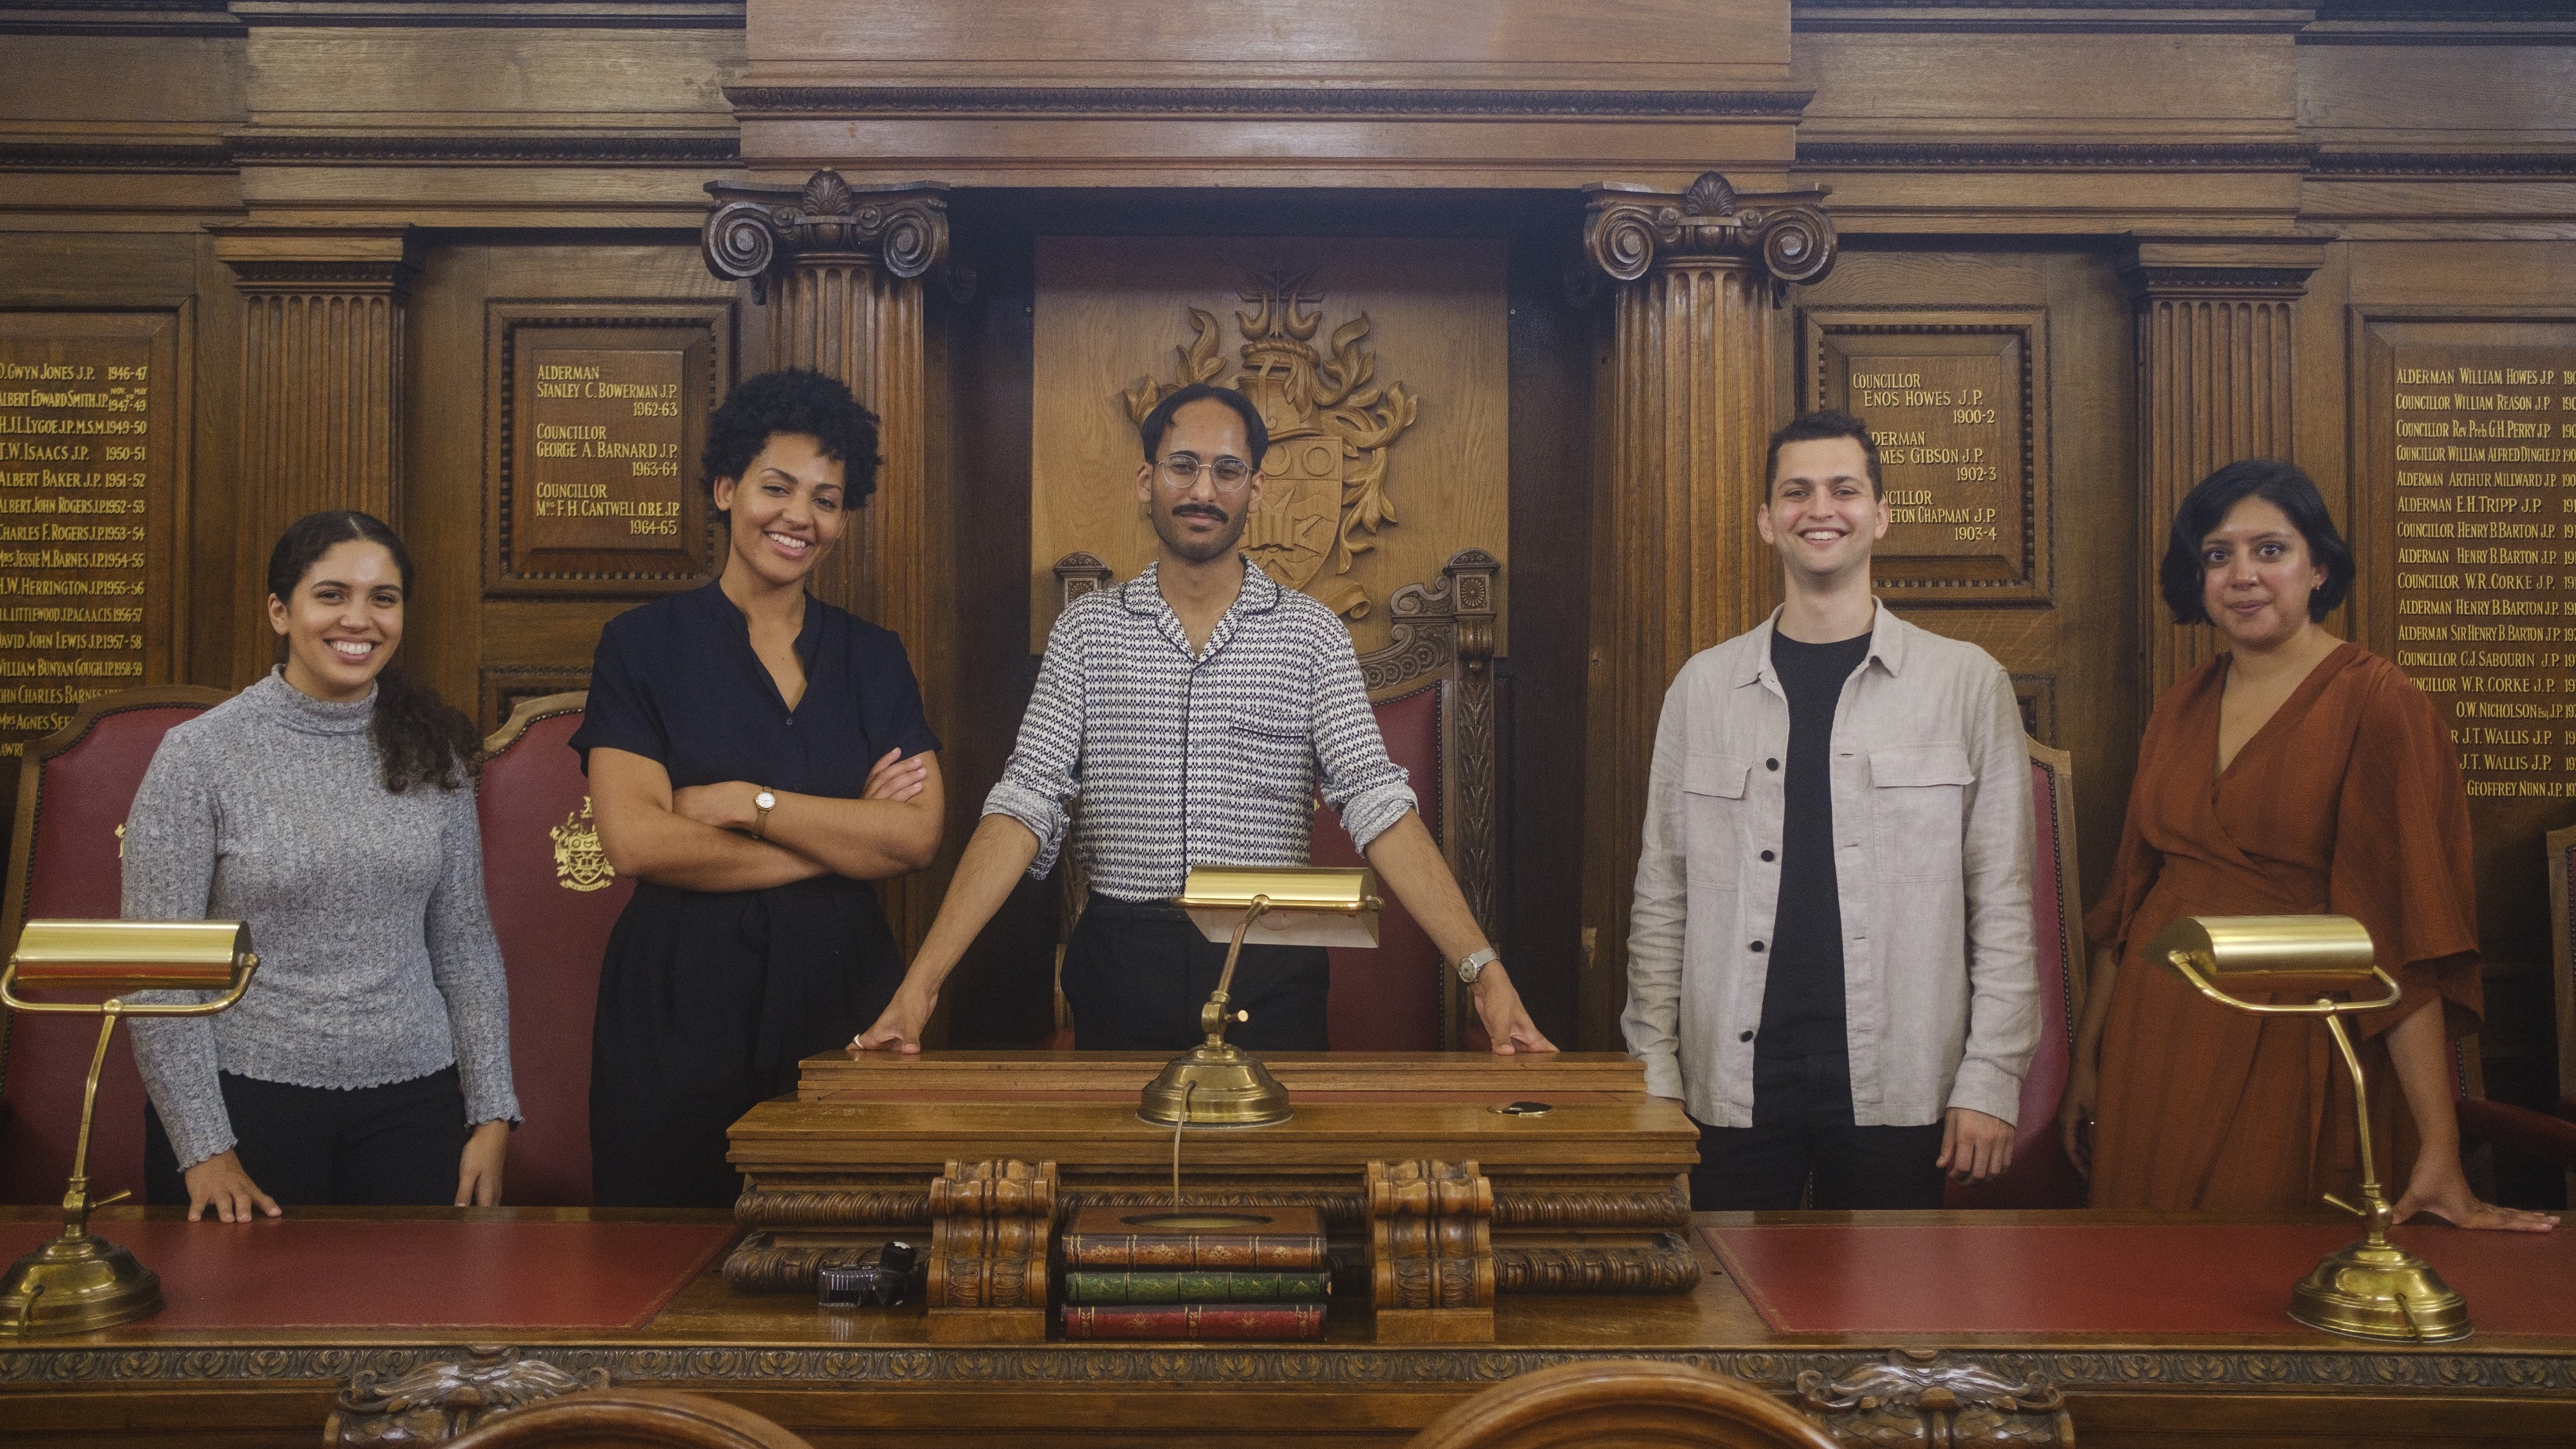 Five NGDP graduates standing in Islington Town Hall council chamber